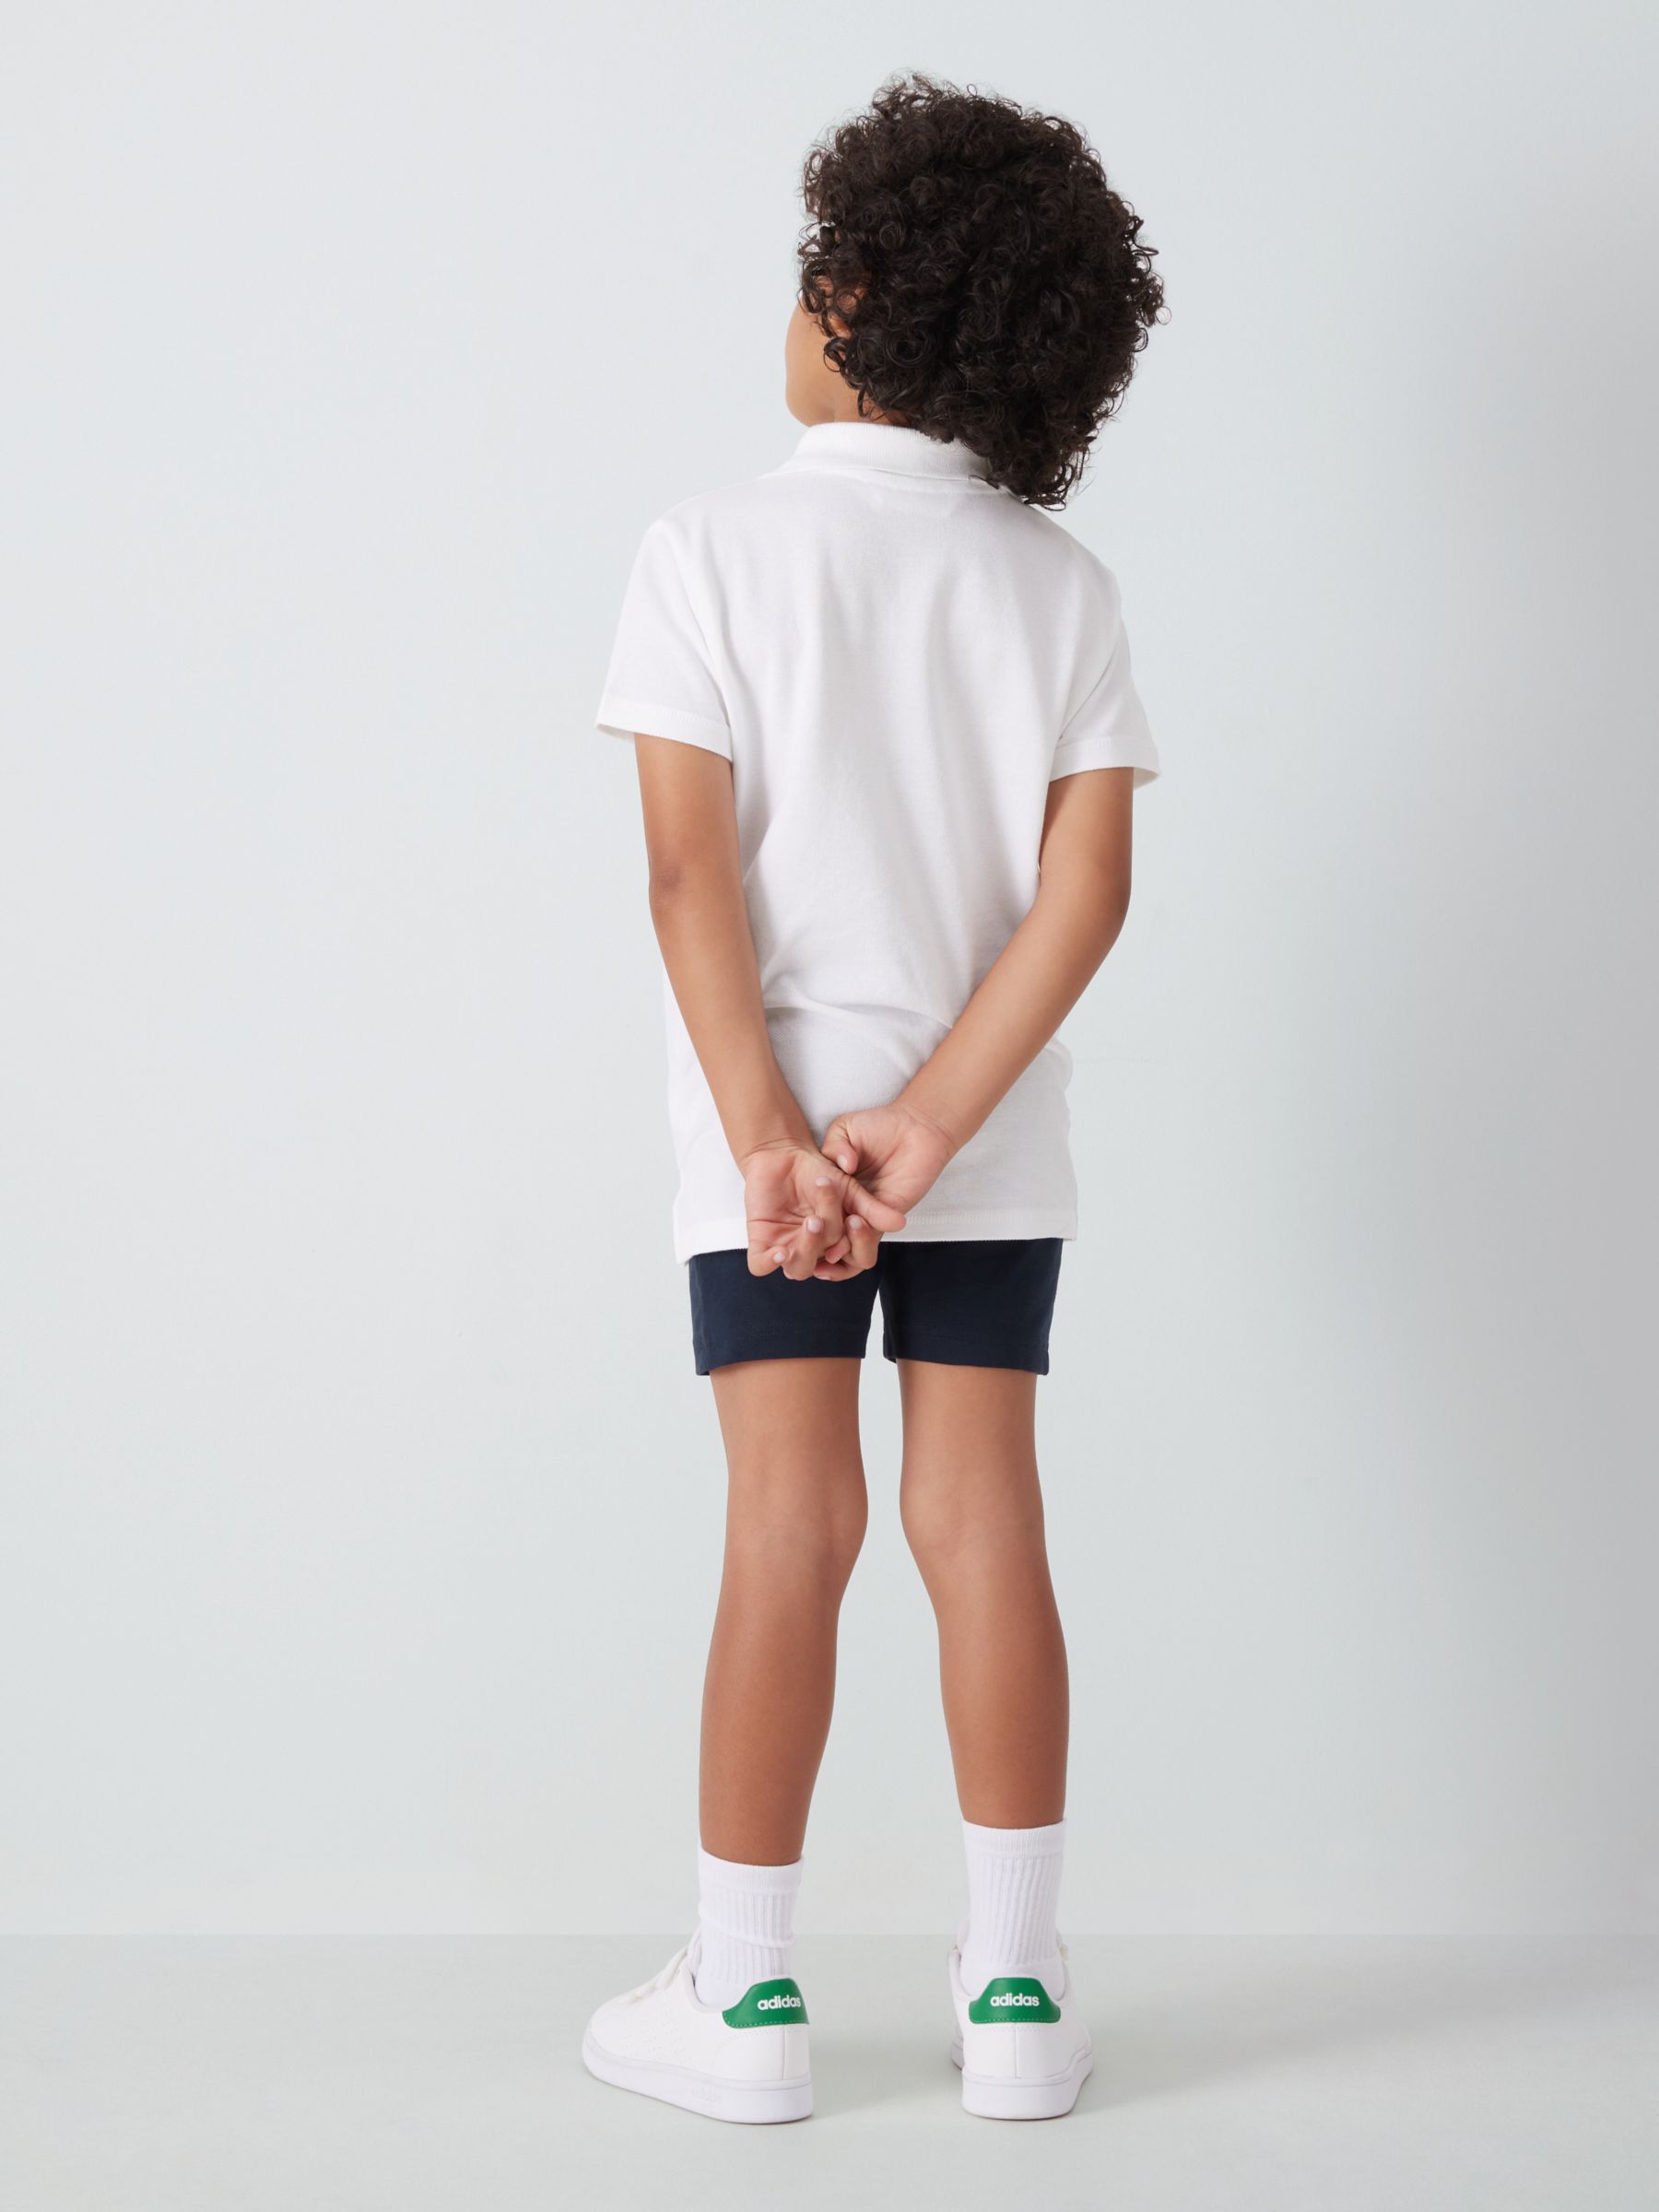 Buy John Lewis ANYDAY Kids' Cycle School Shorts, Pack of 2 Online at johnlewis.com